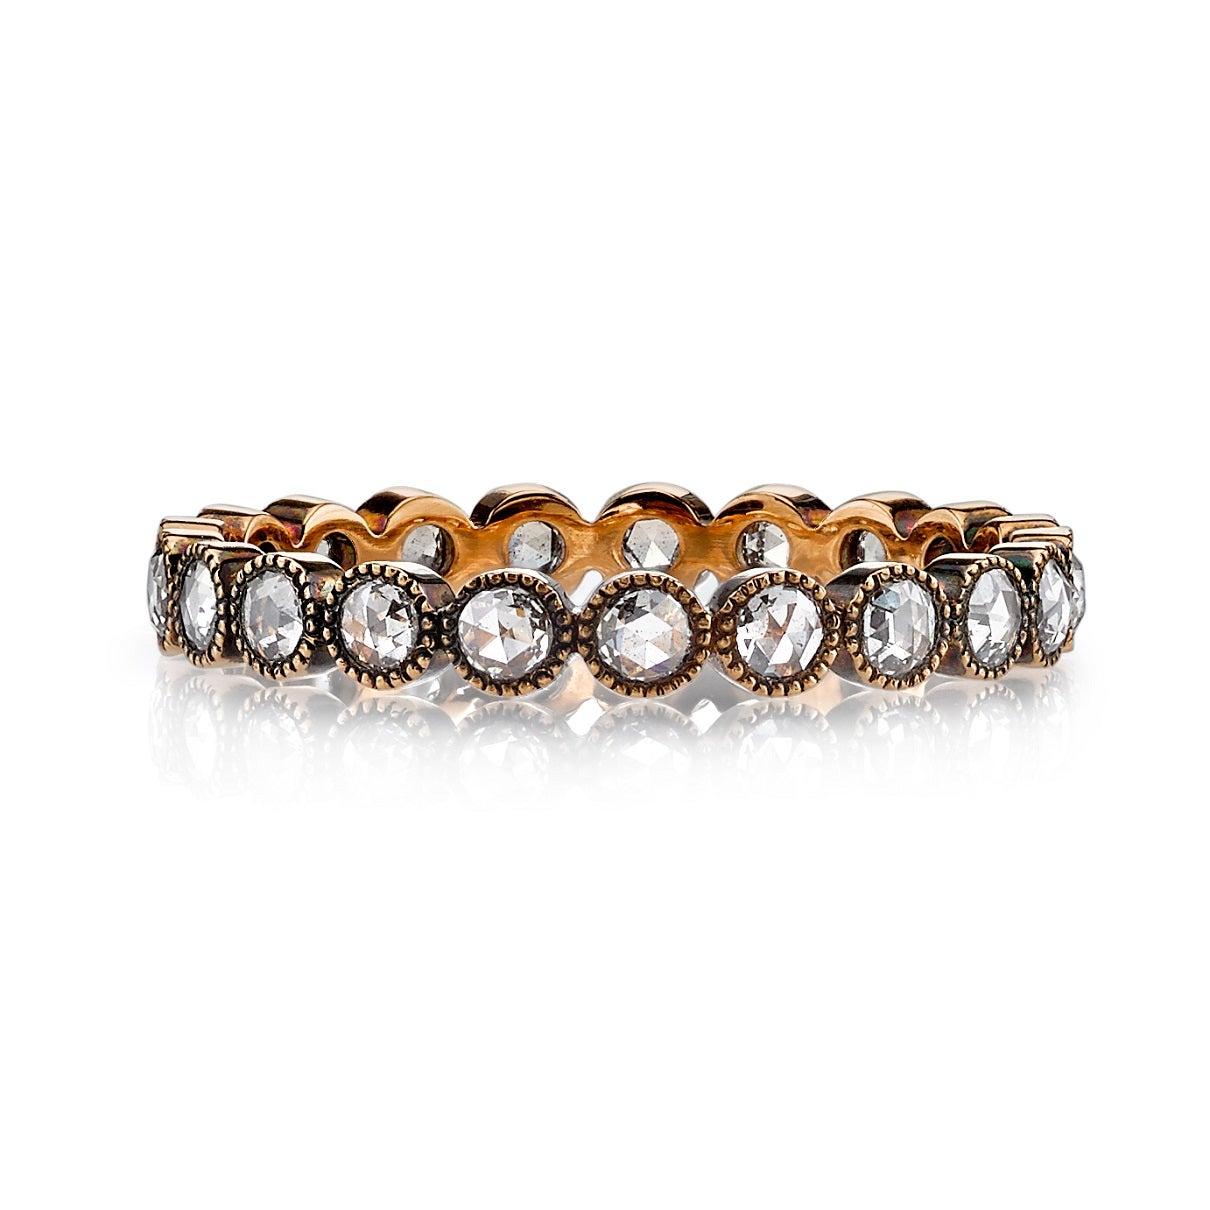 For Sale:  Handcrafted Gabby Rose Cut Diamond Eternity Band by Single Stone 3